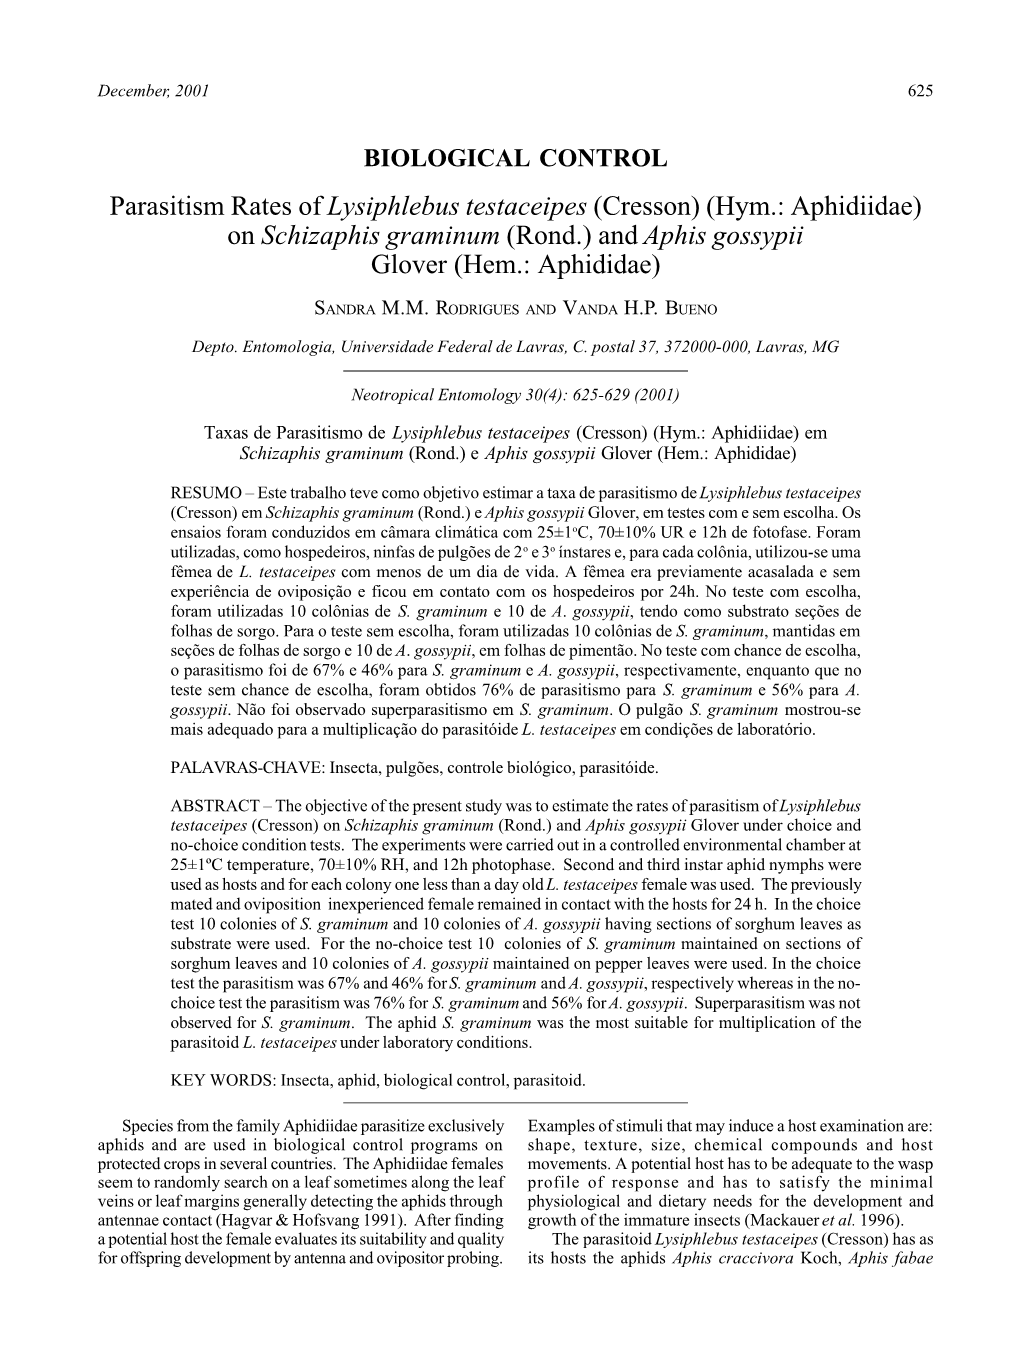 Parasitism Rates of Lysiphlebus Testaceipes (Cresson) (Hym.: Aphidiidae) on Schizaphis Graminum (Rond.) and Aphis Gossypii Glover (Hem.: Aphididae)